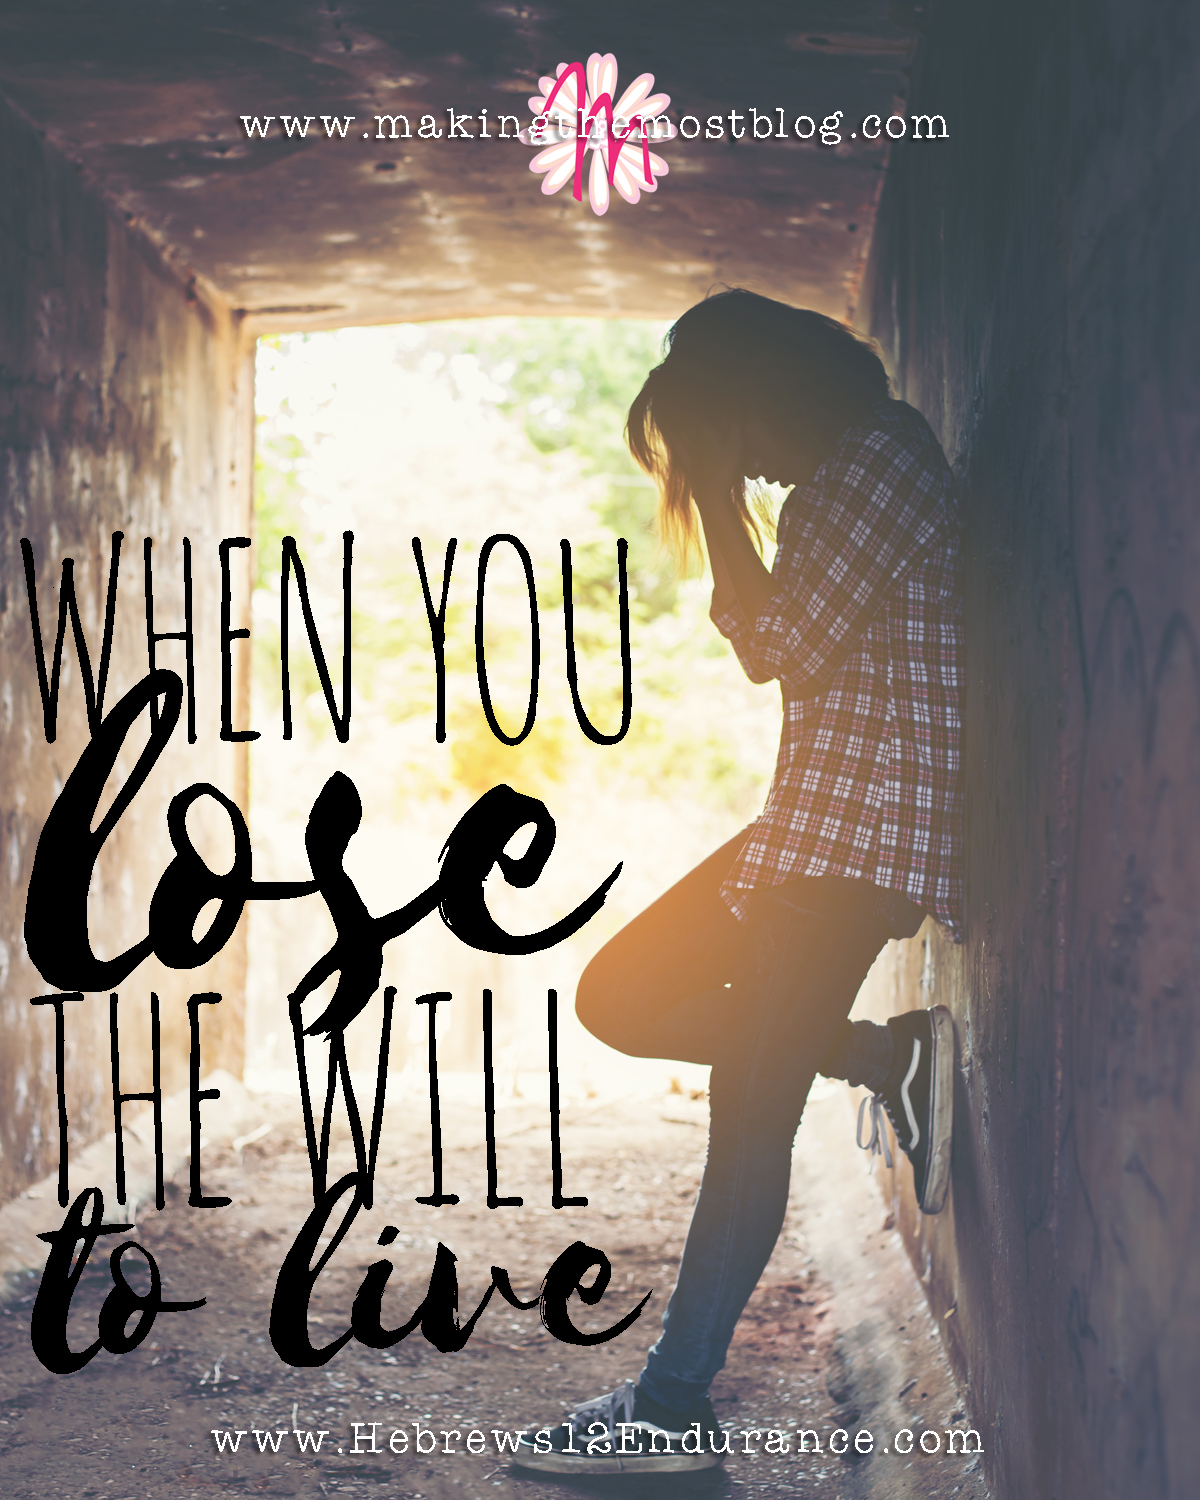 When You Lose the Will to Live | Making the Most Blog